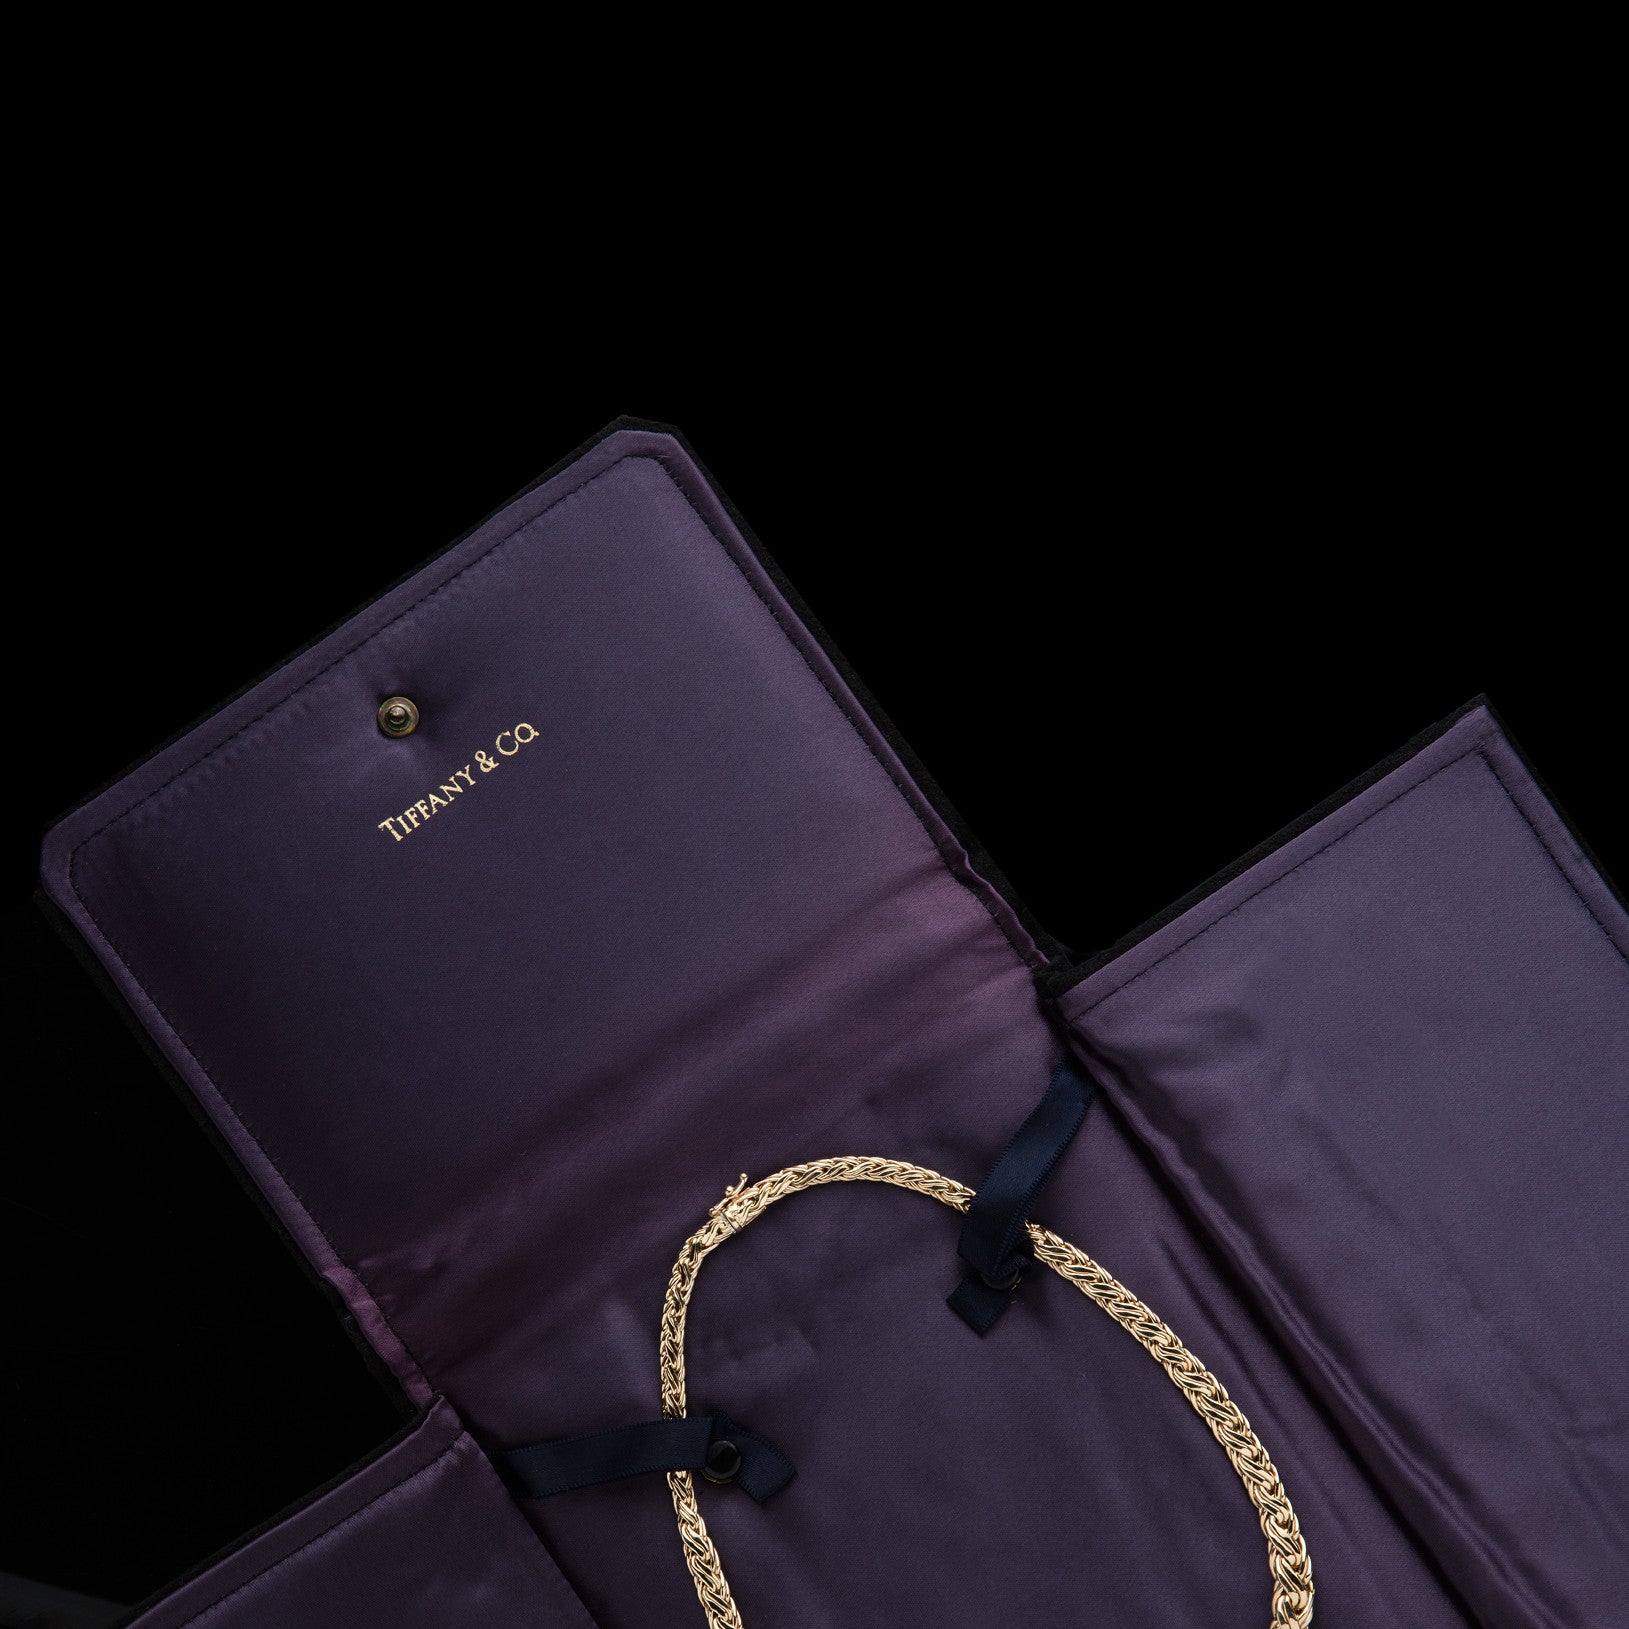 Tiffany & Co.Somerset Gold Mesh Necklace, Pampillonia Jewelers